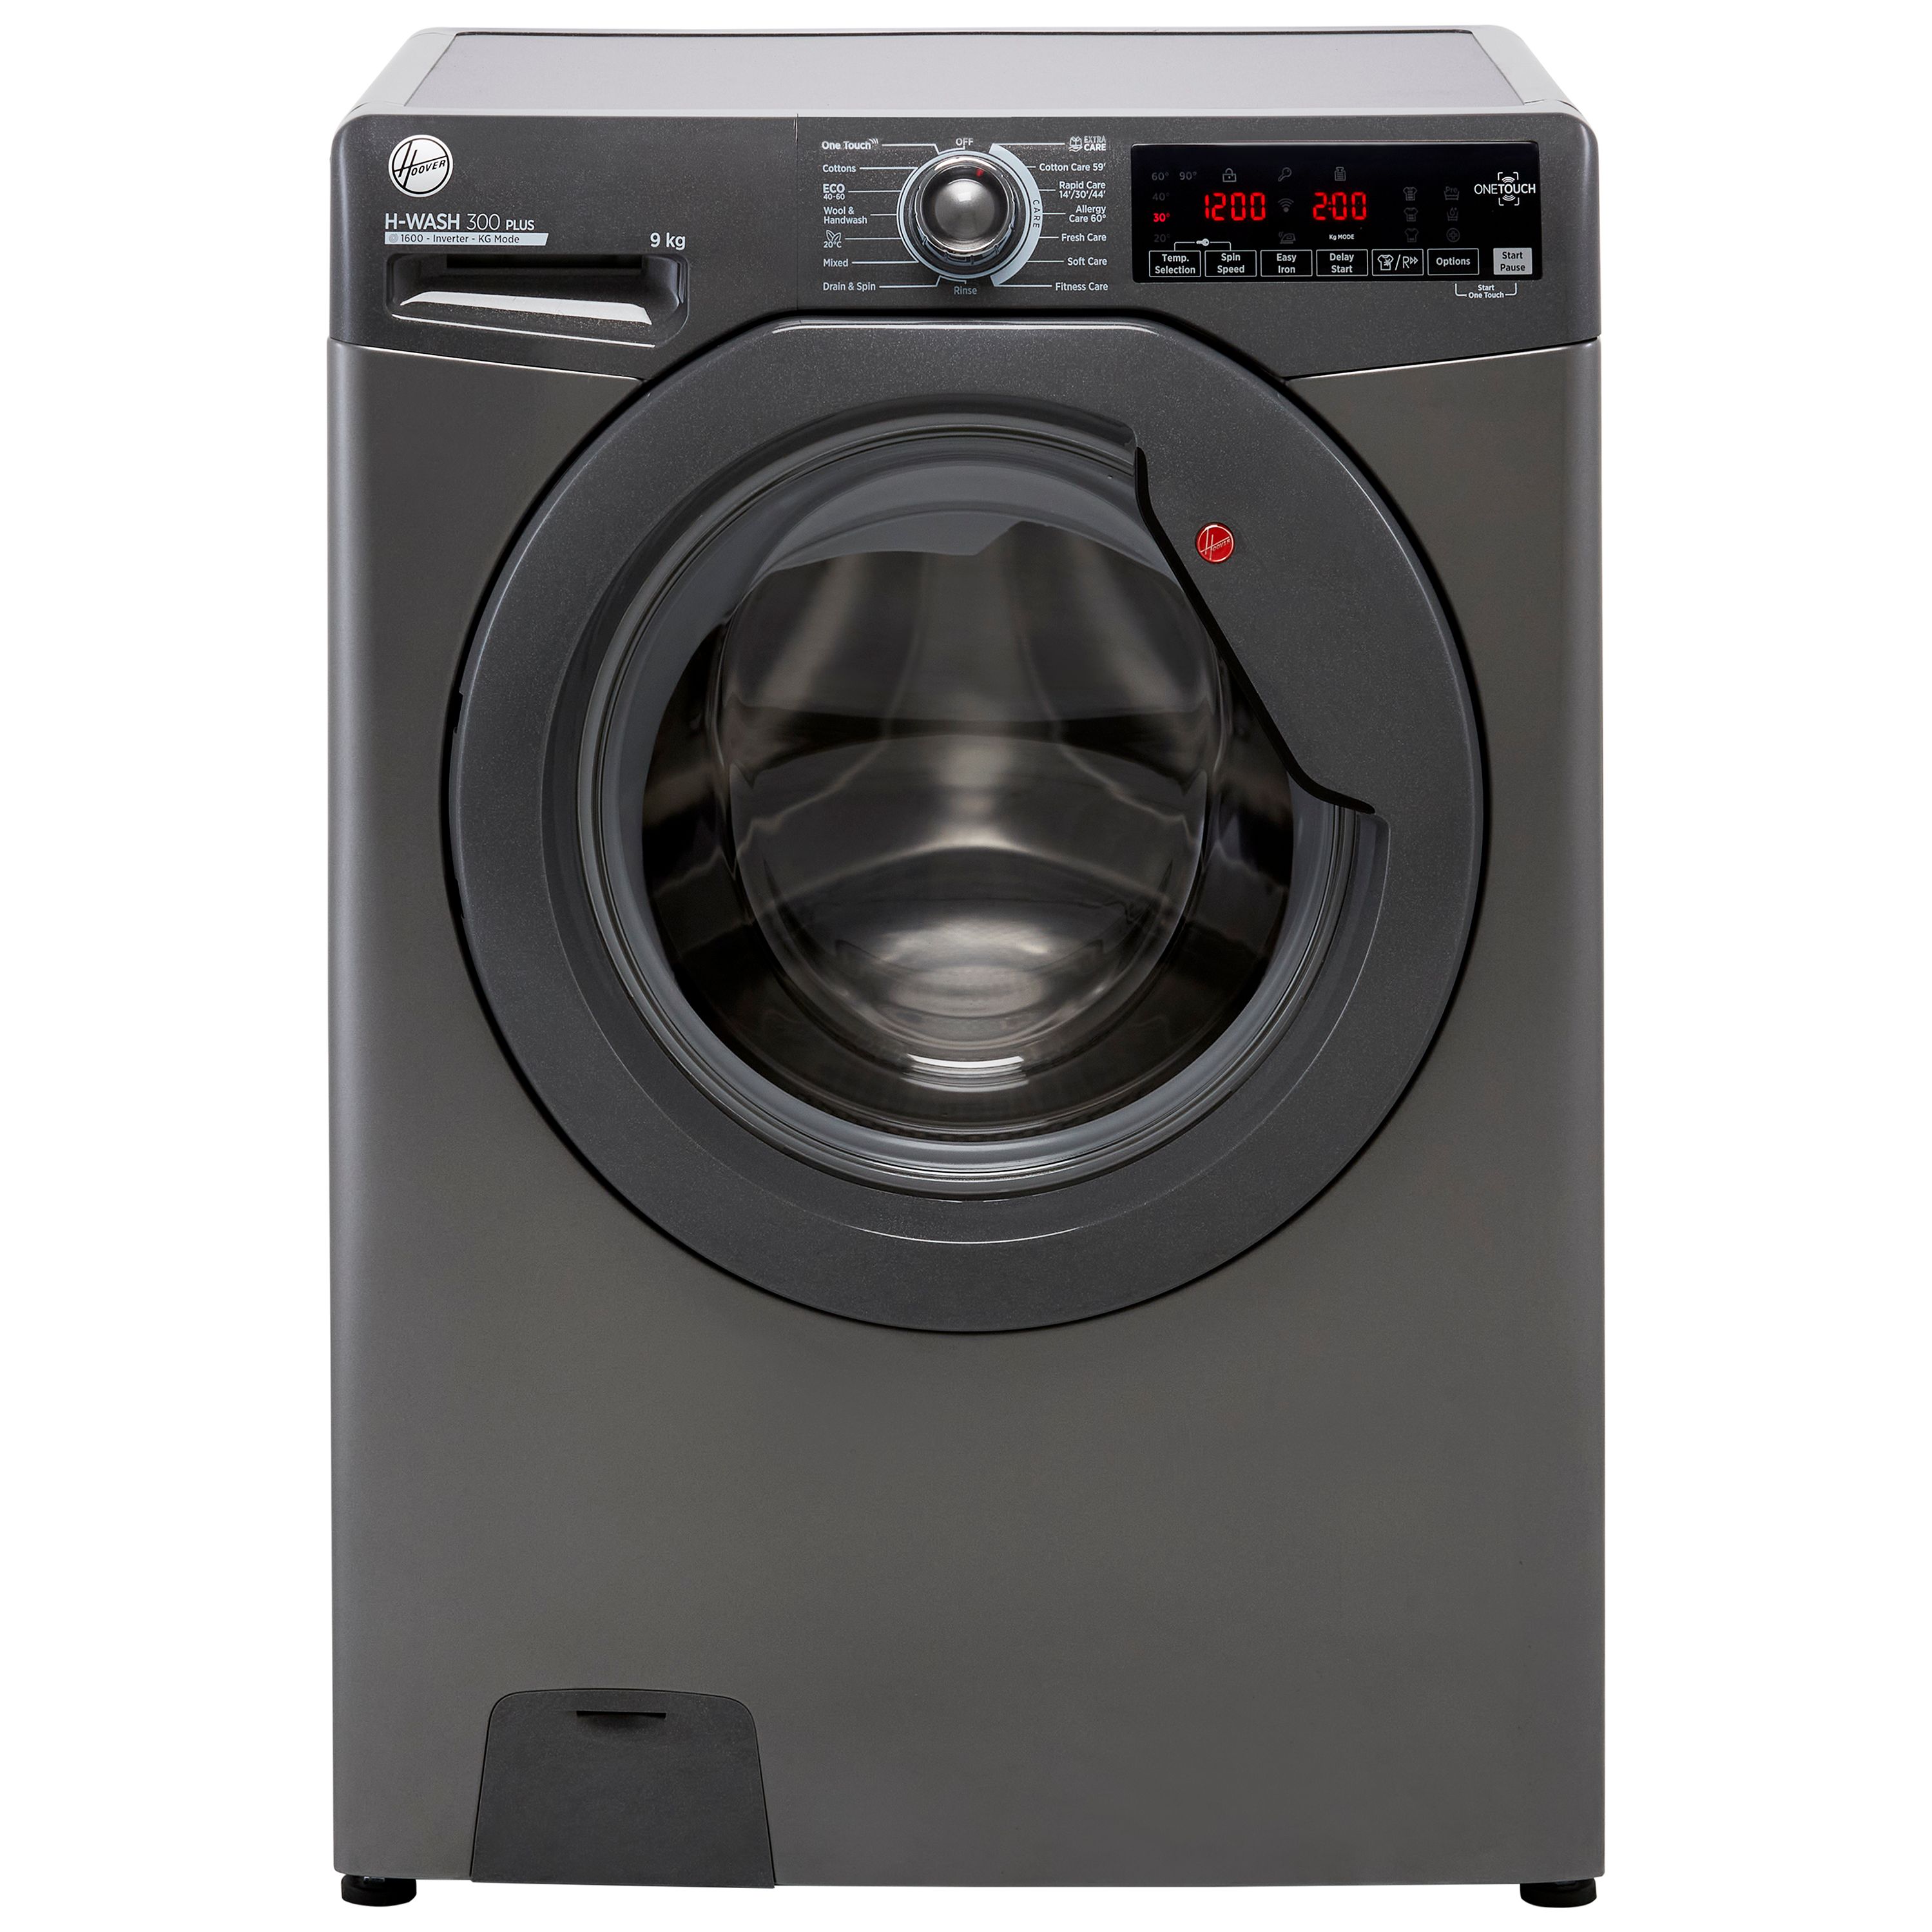 Hoover H-WASH 300 H3W69TMGGE/1 9kg Washing Machine with 1600 rpm - Graphite - B Rated, Silver